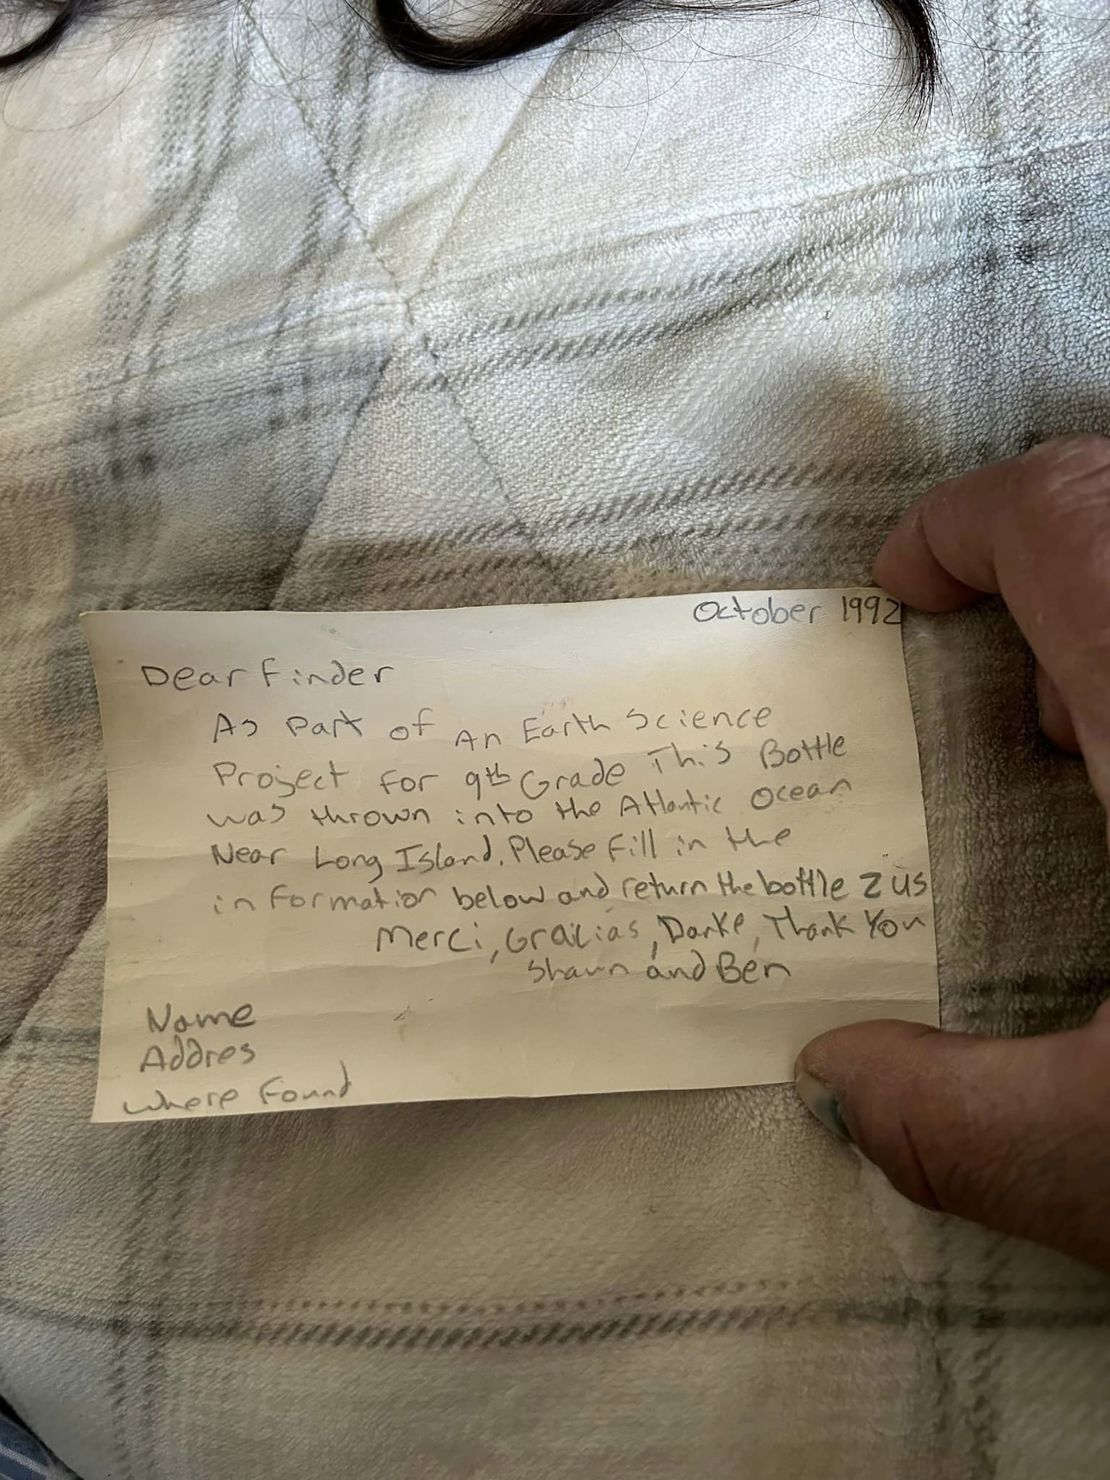 A student's letter from 1992 was preserved inside the bottle found on Long Island.